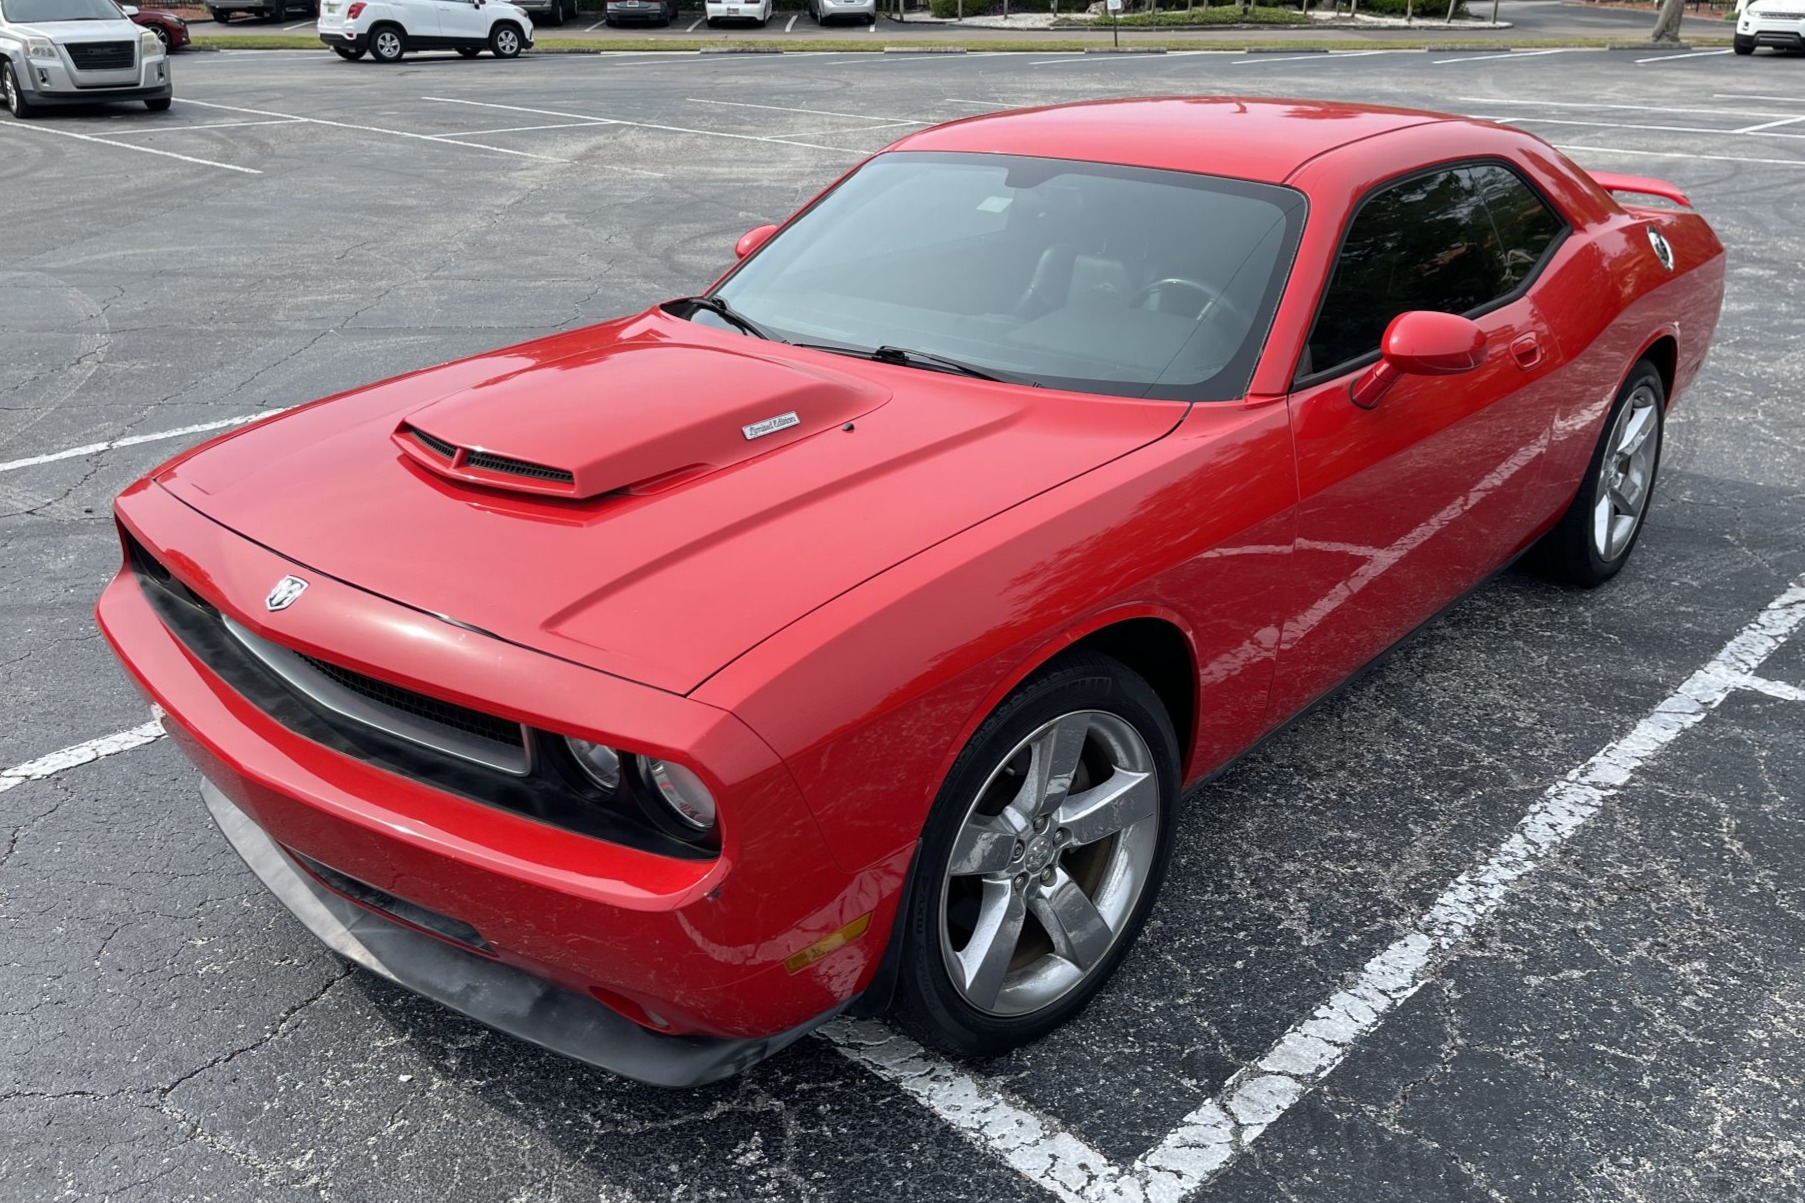 Used 2010 Dodge Challenger R/T Review